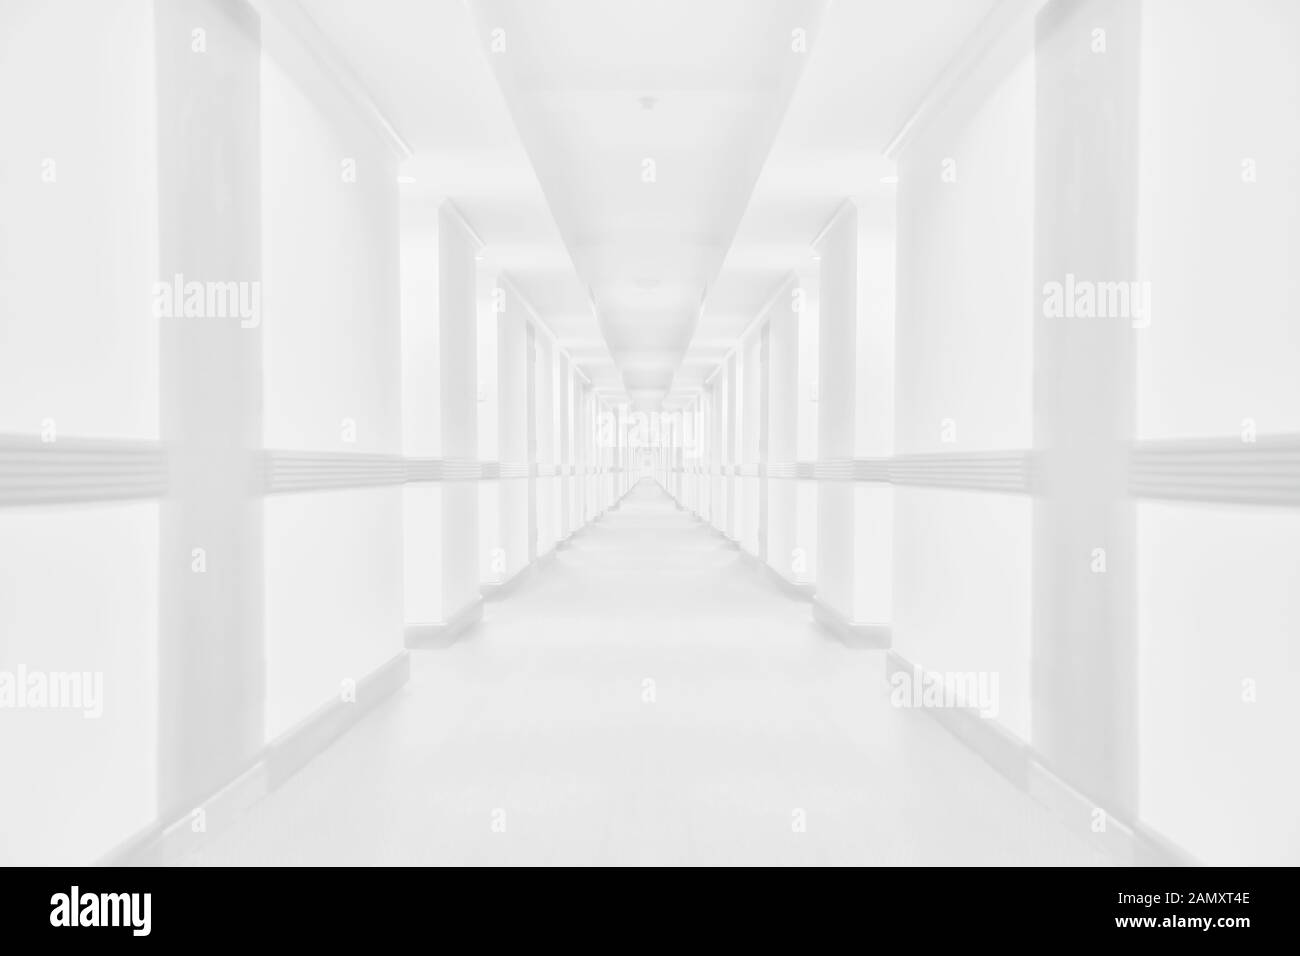 White Blur Abstract corridor pathway Background From Building Hallway for design Stock Photo